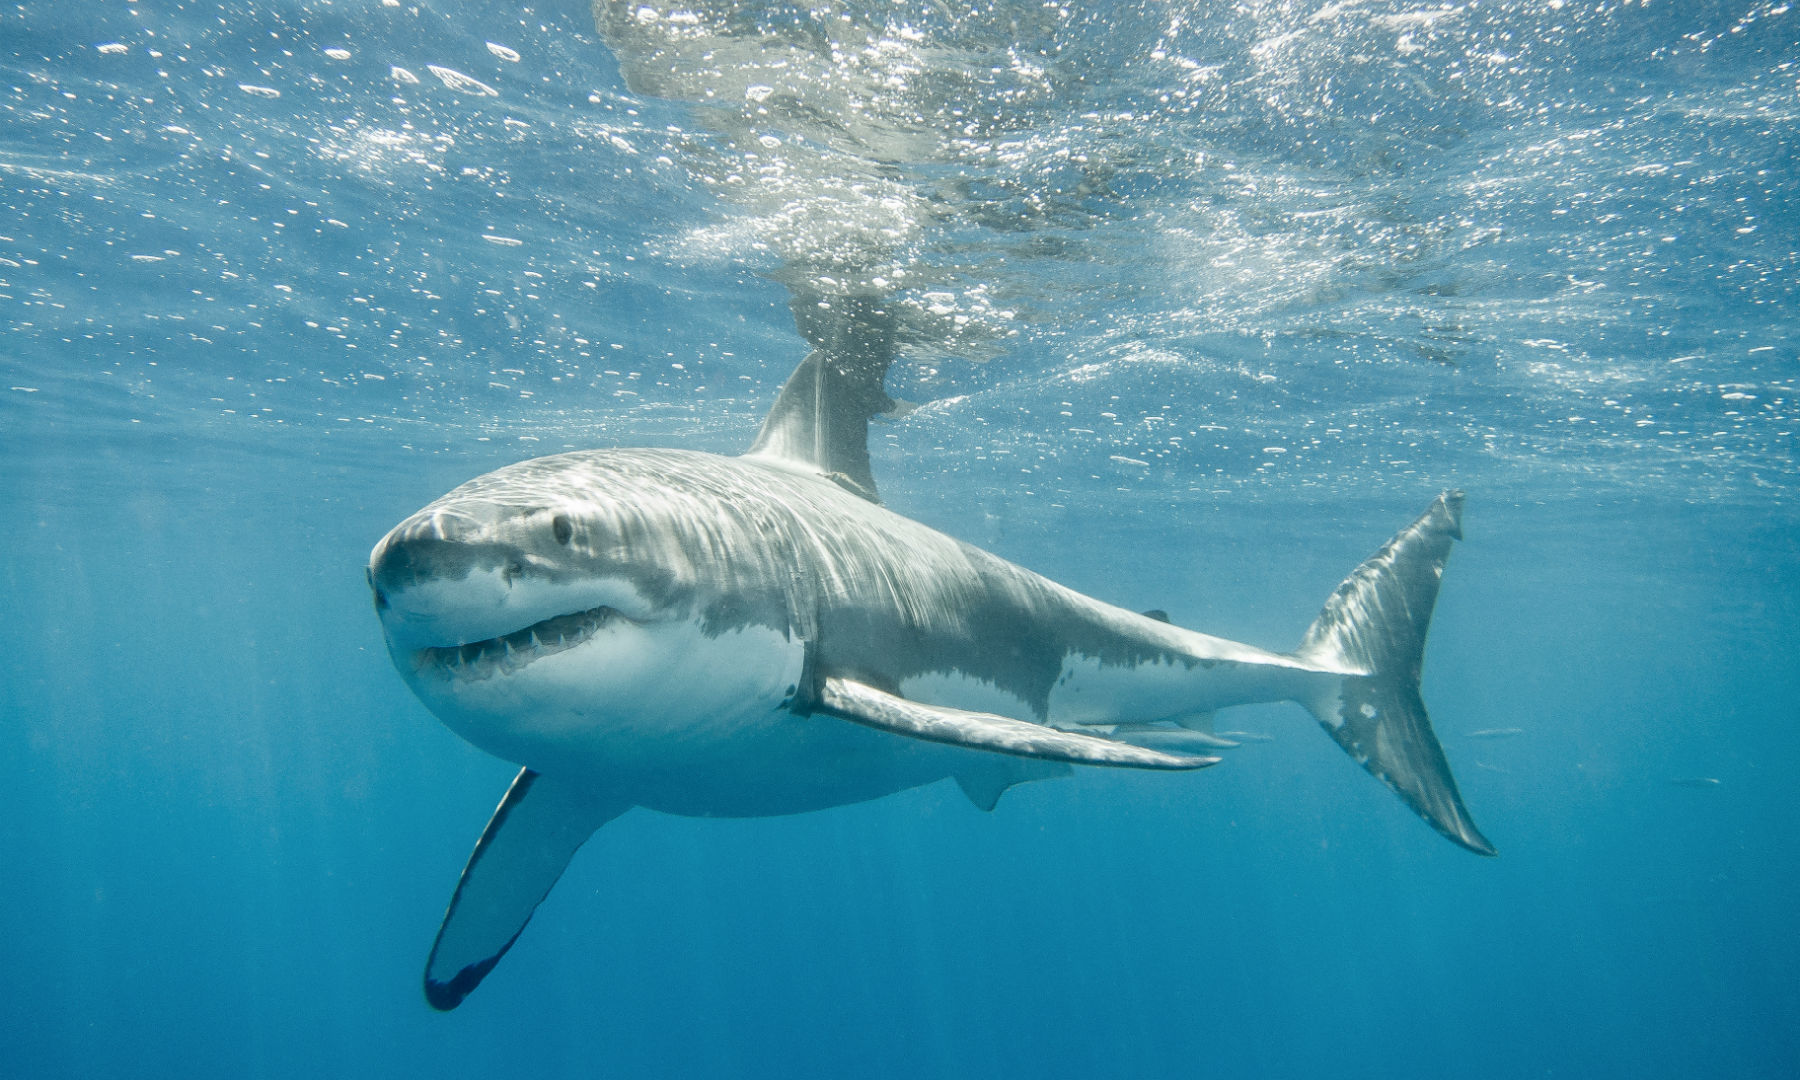 5-ocean-animals-that-are-faster-than-michael-phelps-ocean-conservancy